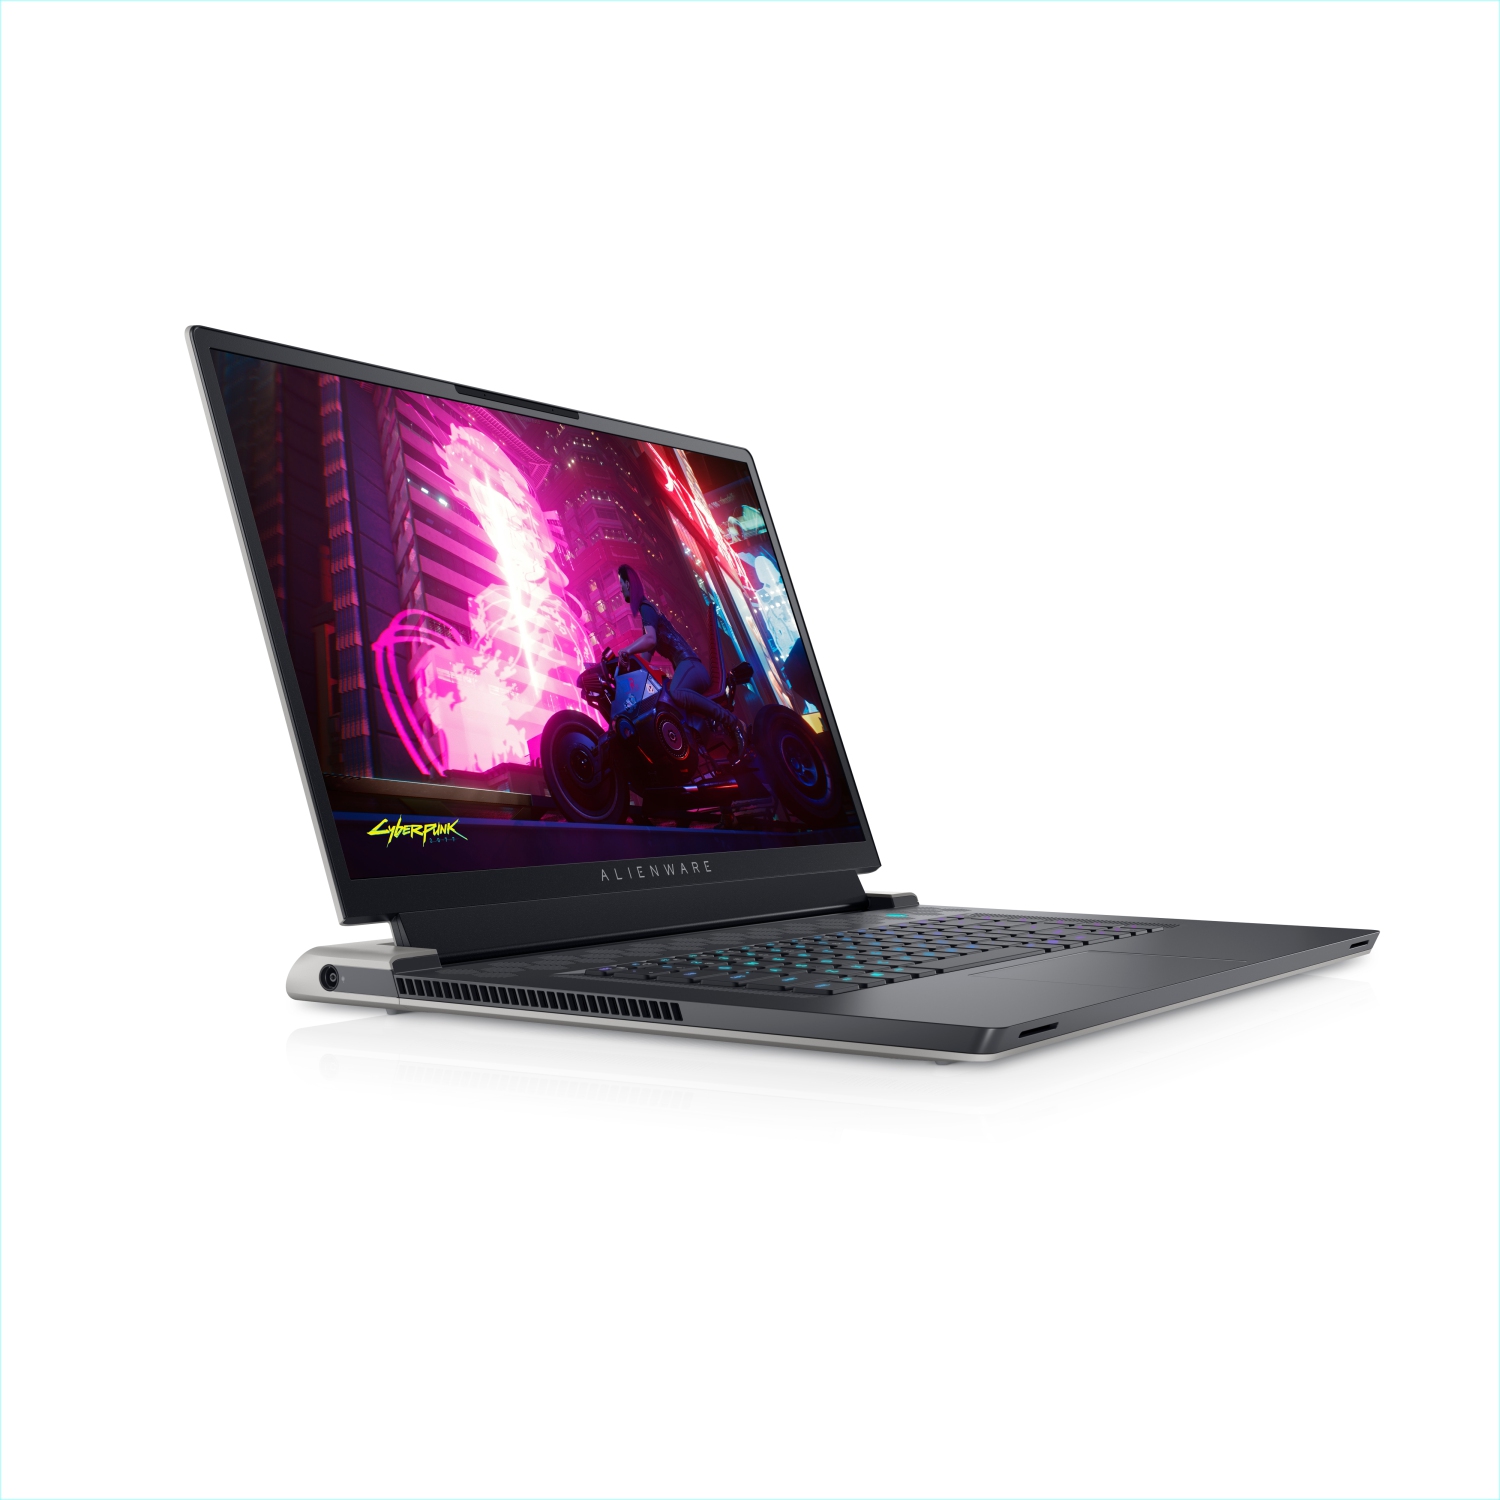 Refurbished (Excellent) - Dell Alienware X17 R1 Gaming Laptop (2021), 17.3" FHD, Core i9, 1TB SSD + 1TB SSD, 32GB RAM, RTX 3080, 5 GHz, 11th Gen CPU Certified Refurbished